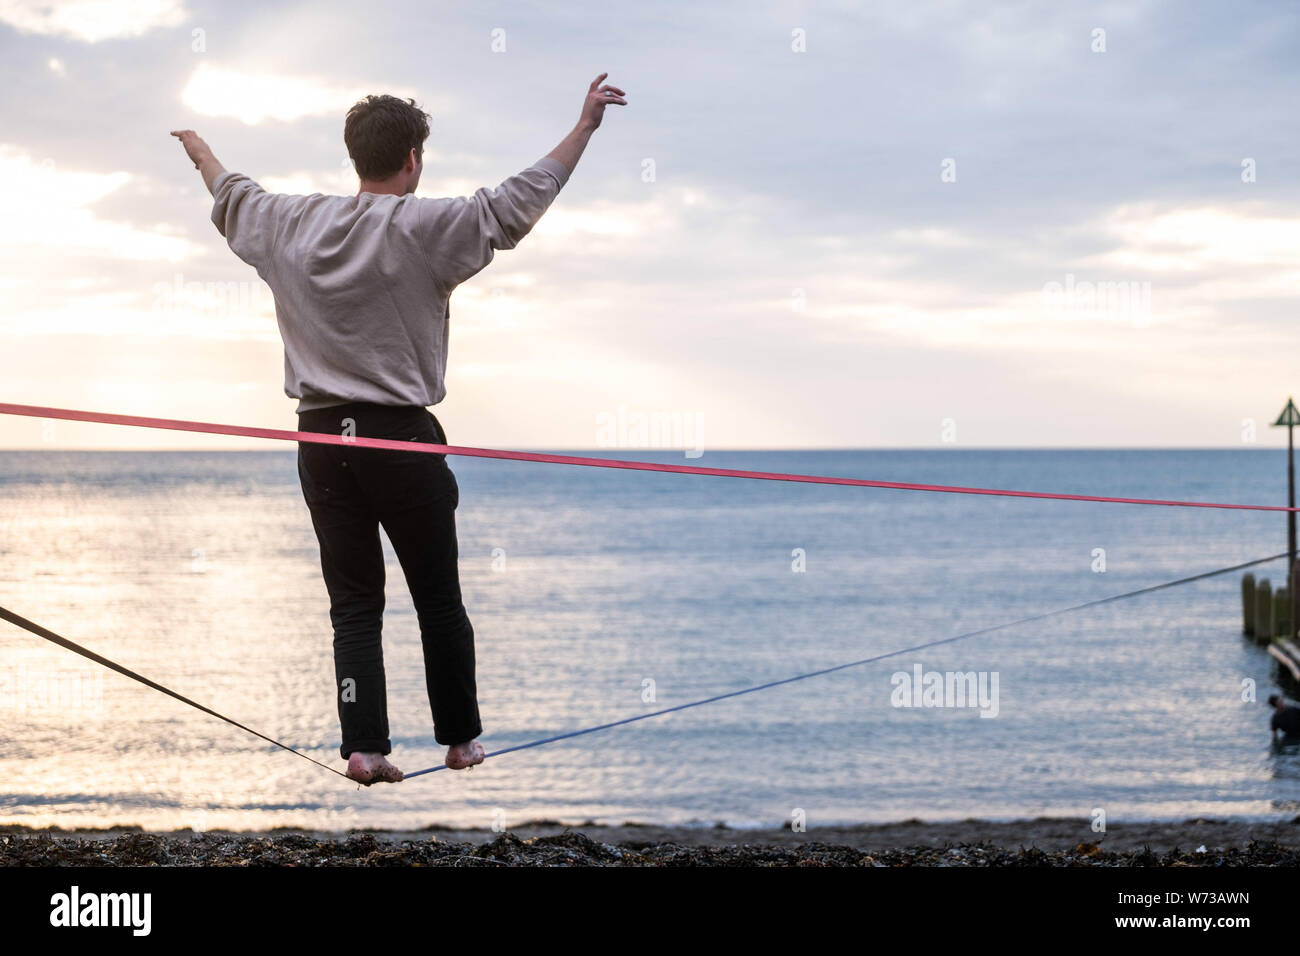 Aberystwyth, Wales, UK. 4th Aug 2019. A young man practices his slackline balancing techniques at  the seaside in Aberystwyth , at the end of a warm but unsettled day on the west wales coast. Photo credit Keith Morris / Alamy Live News Stock Photo